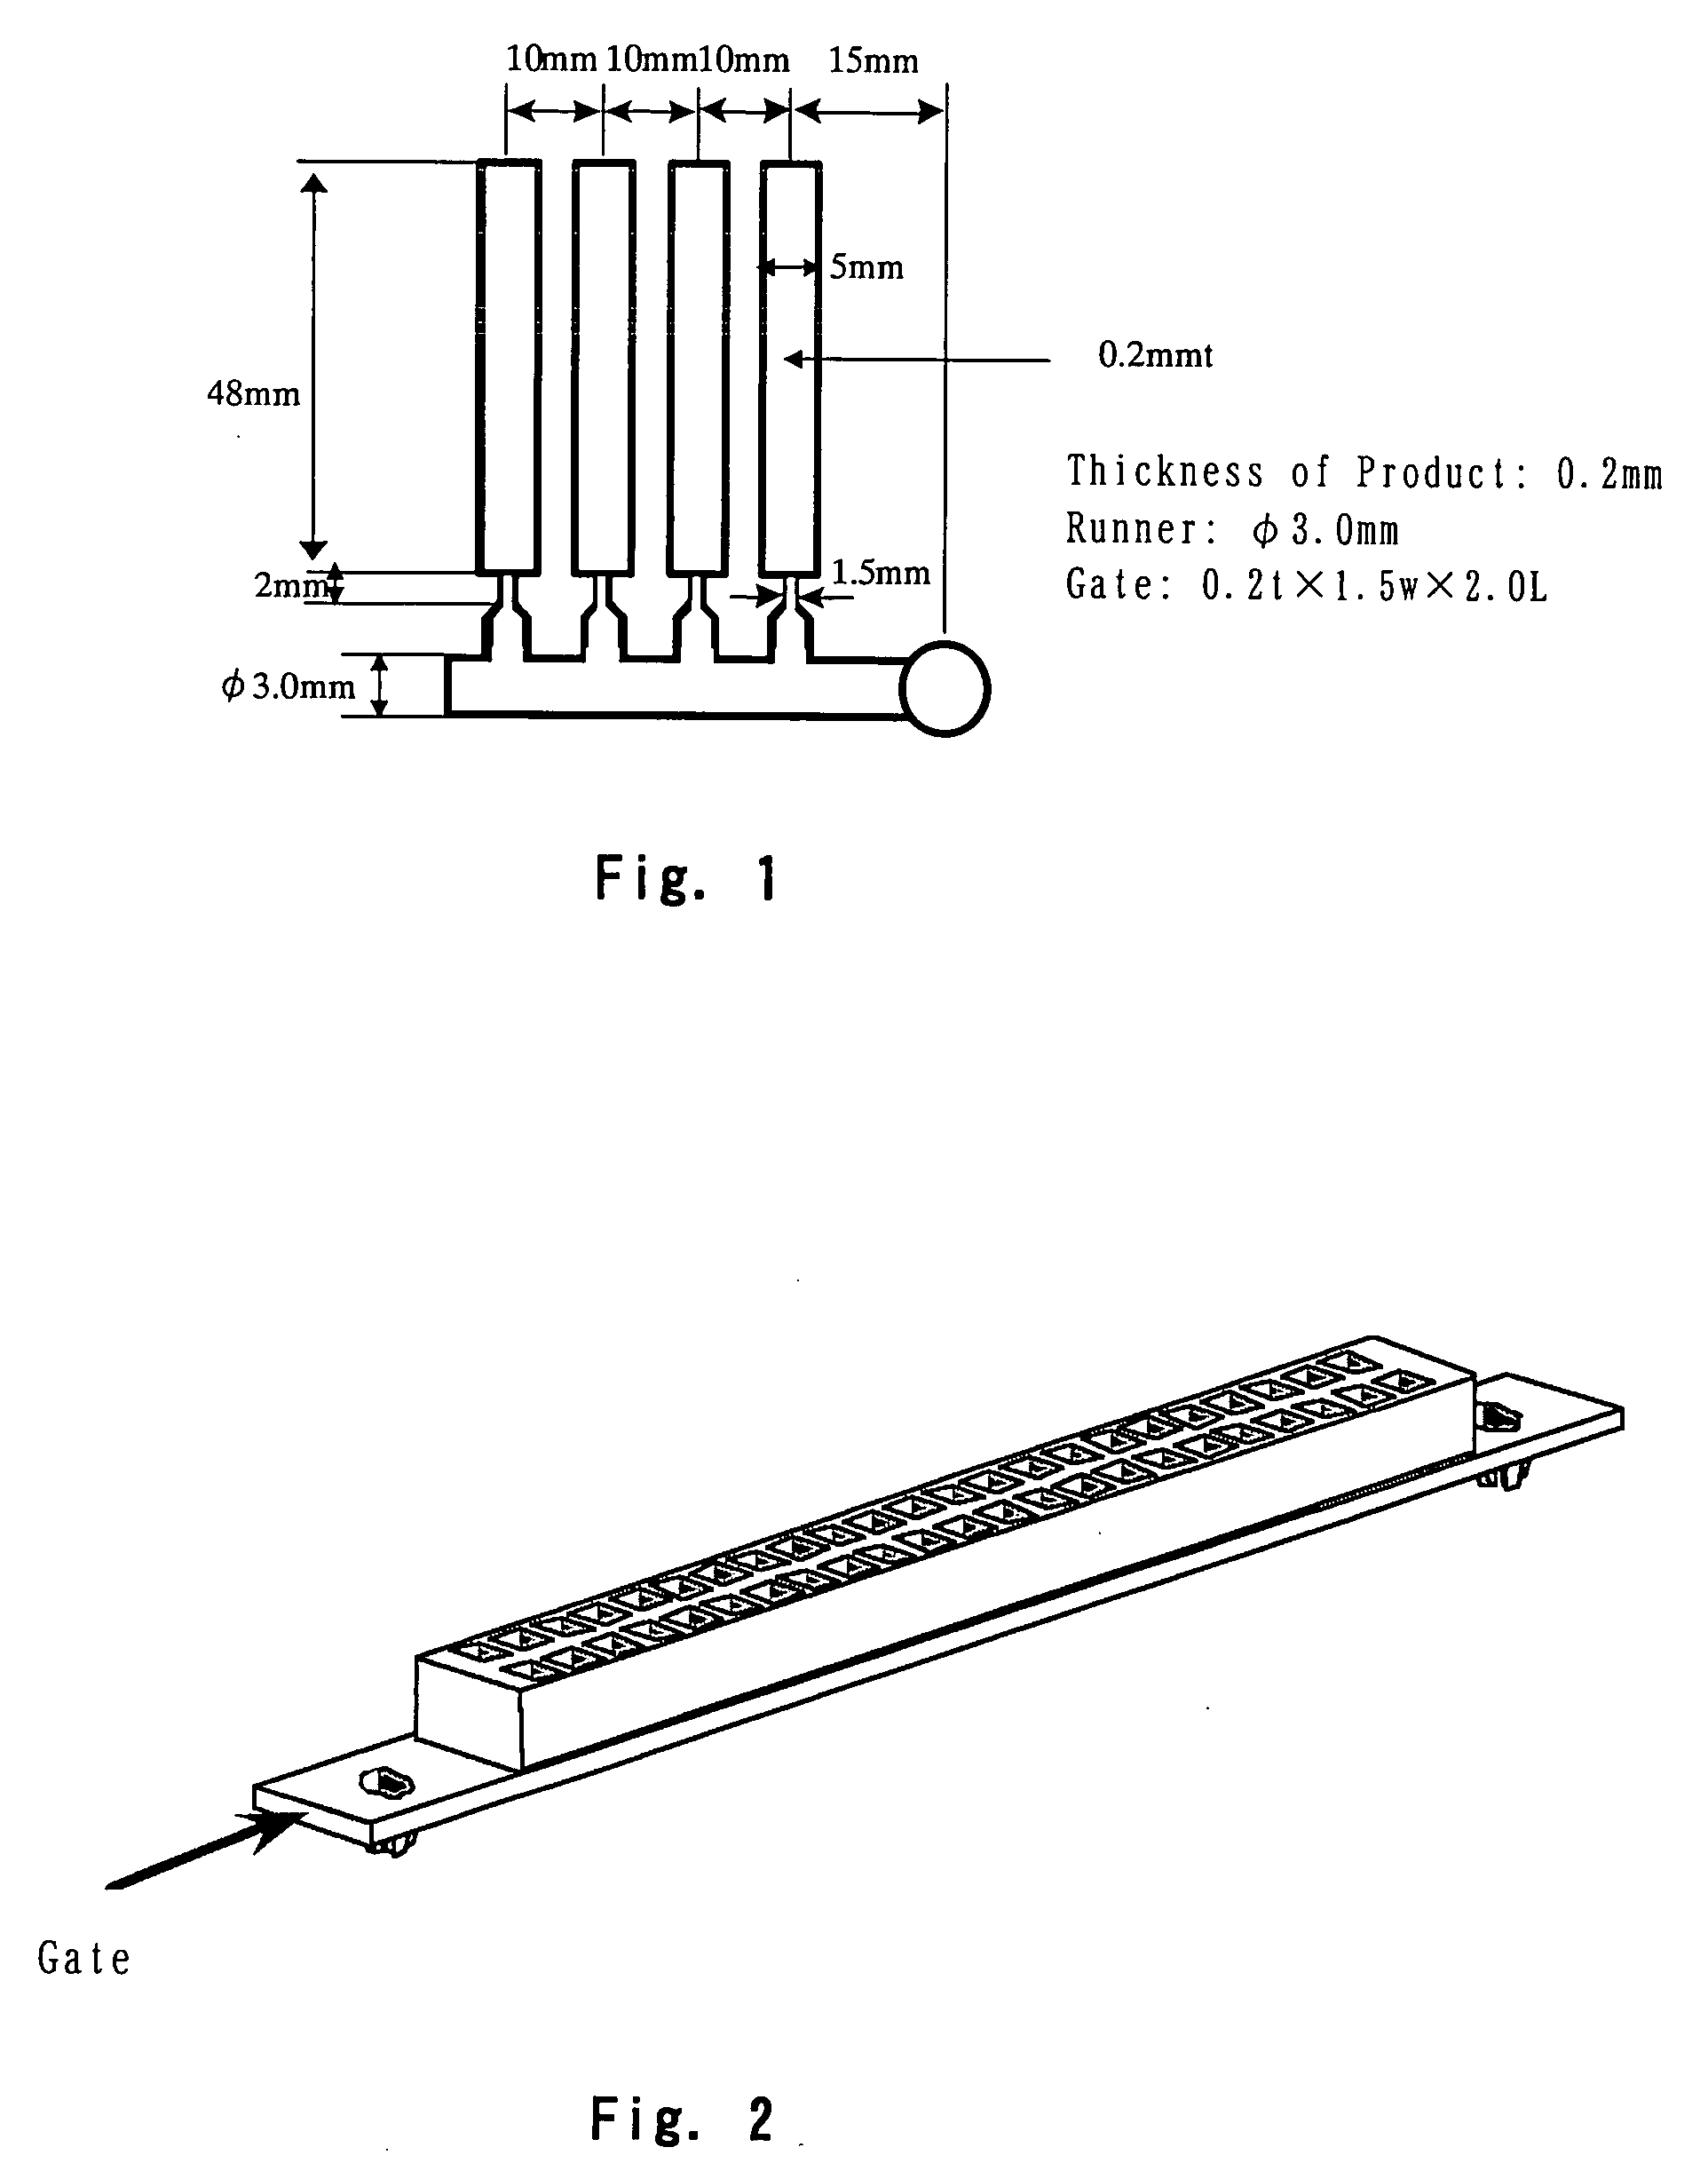 Liquid crystalline polymer cpmposition and use thereof